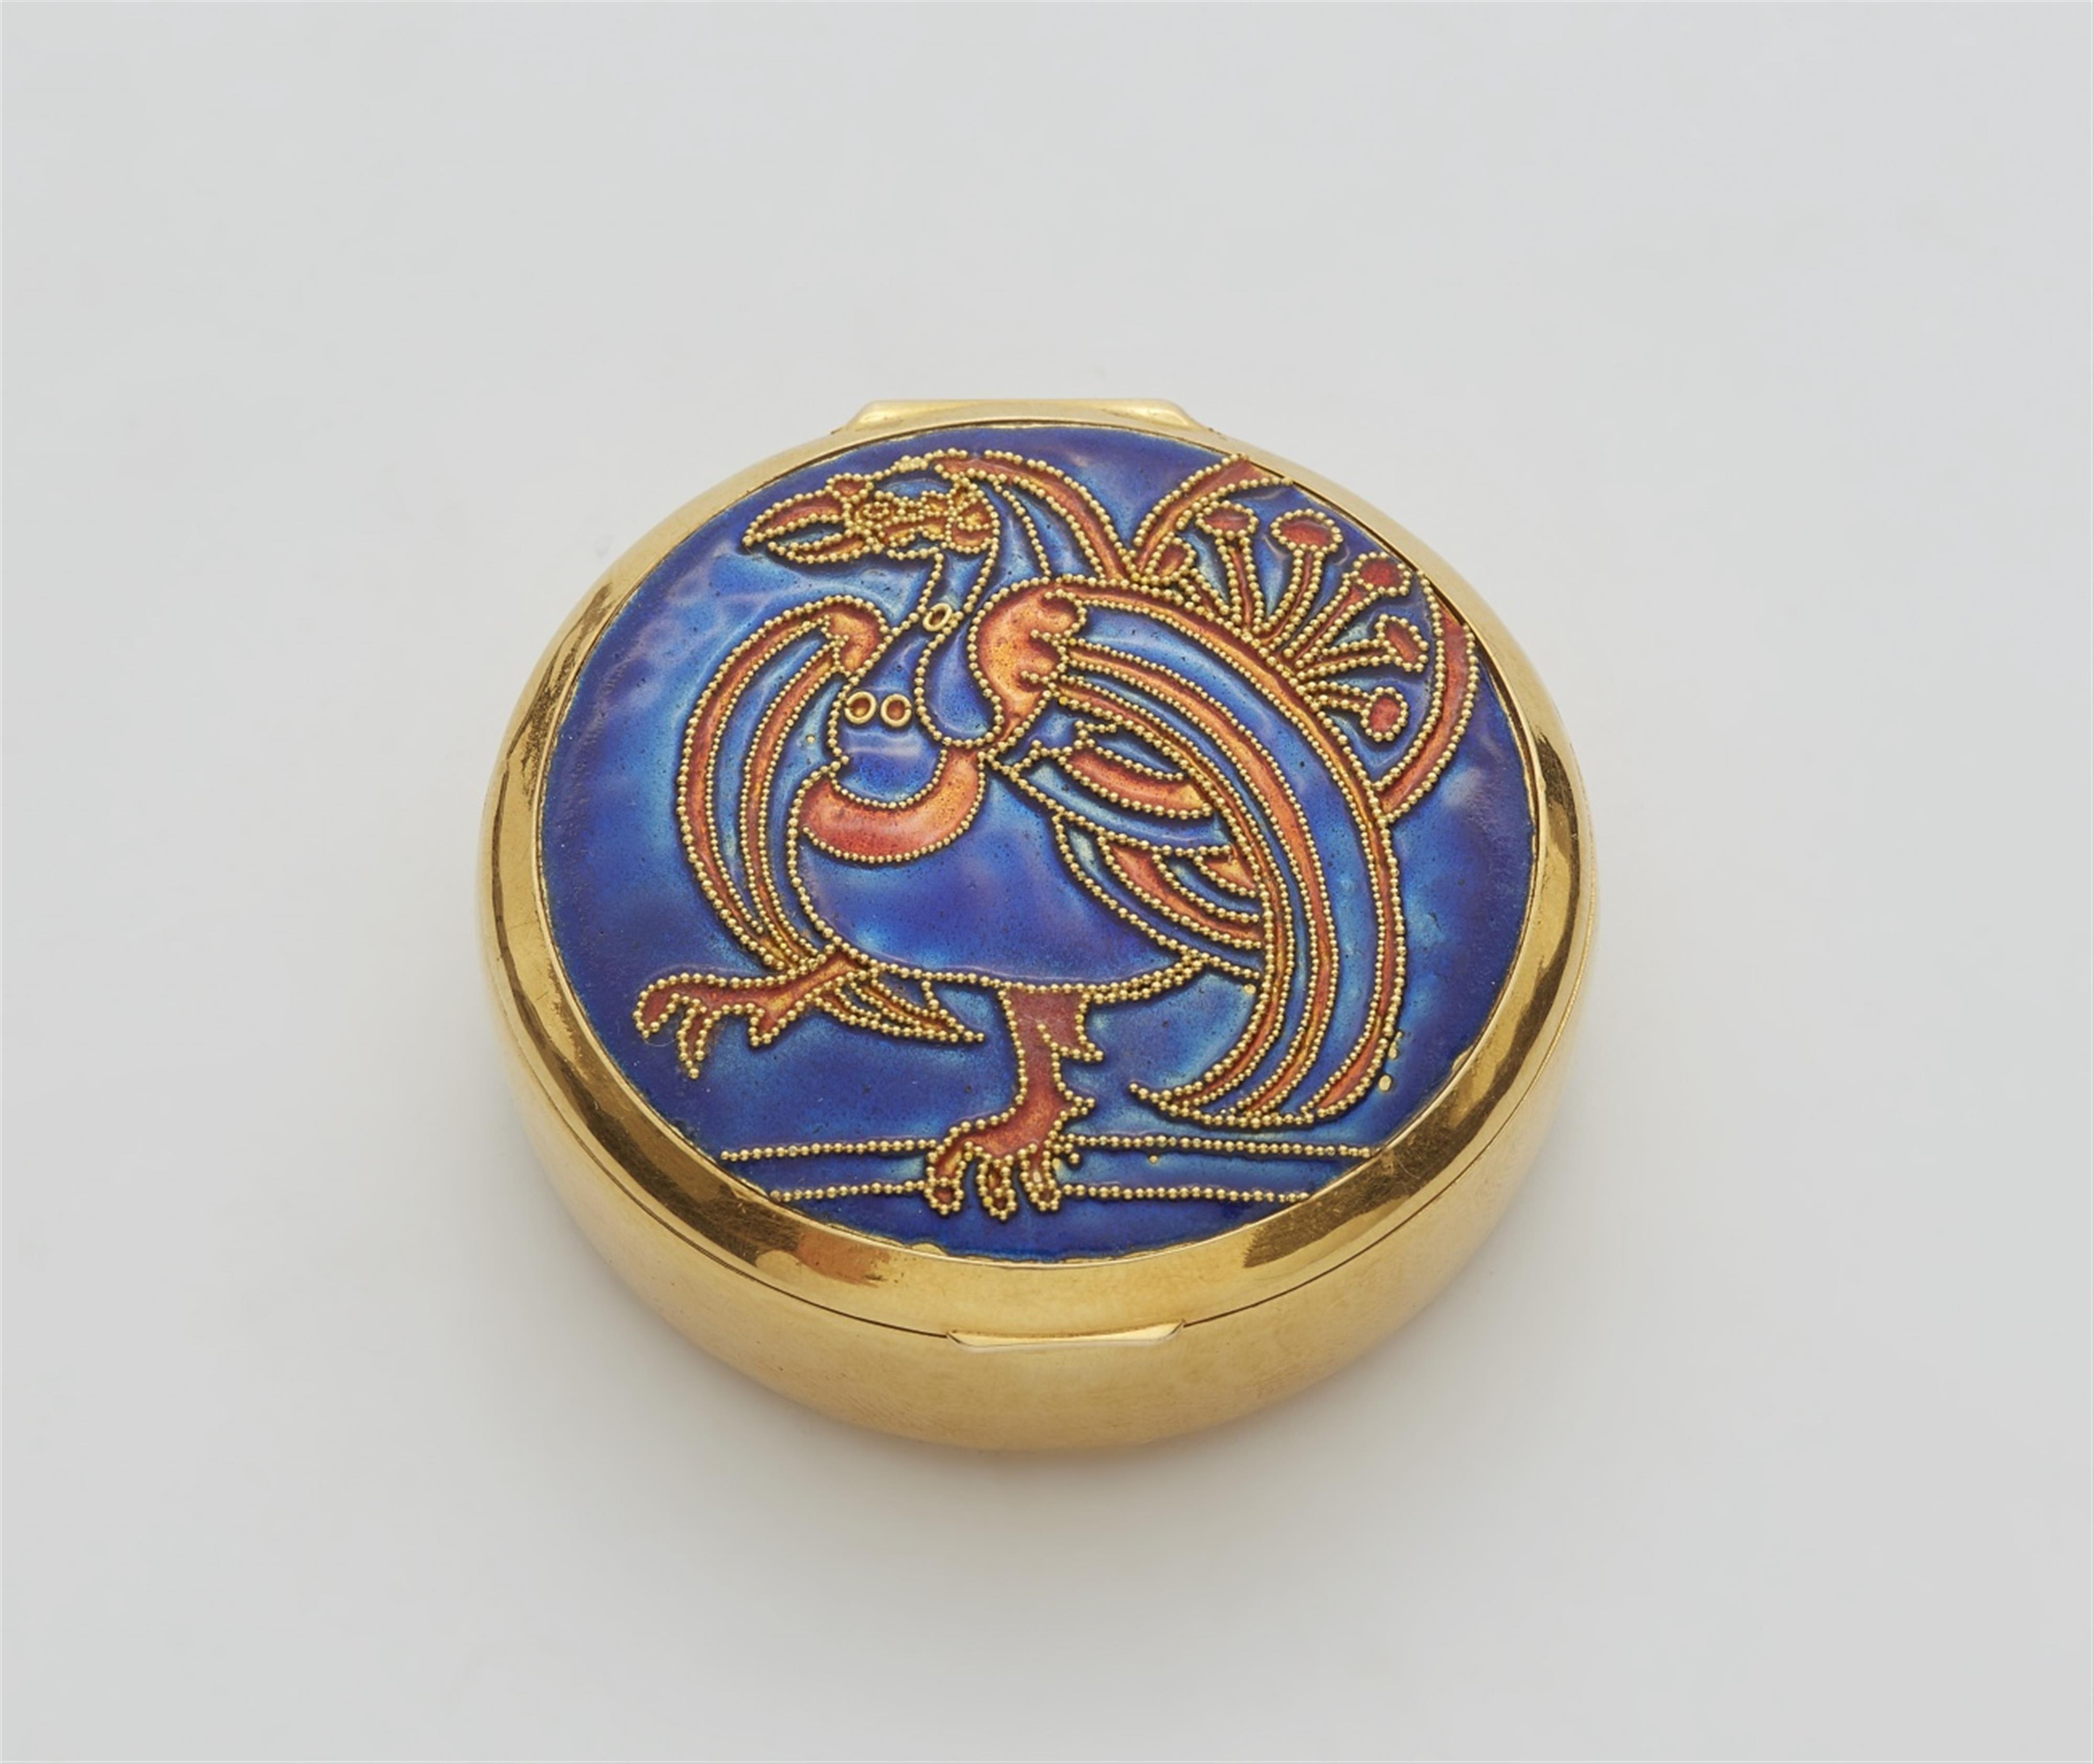 An 18 and 21k gold enamelled "Greif" pillbox - image-1